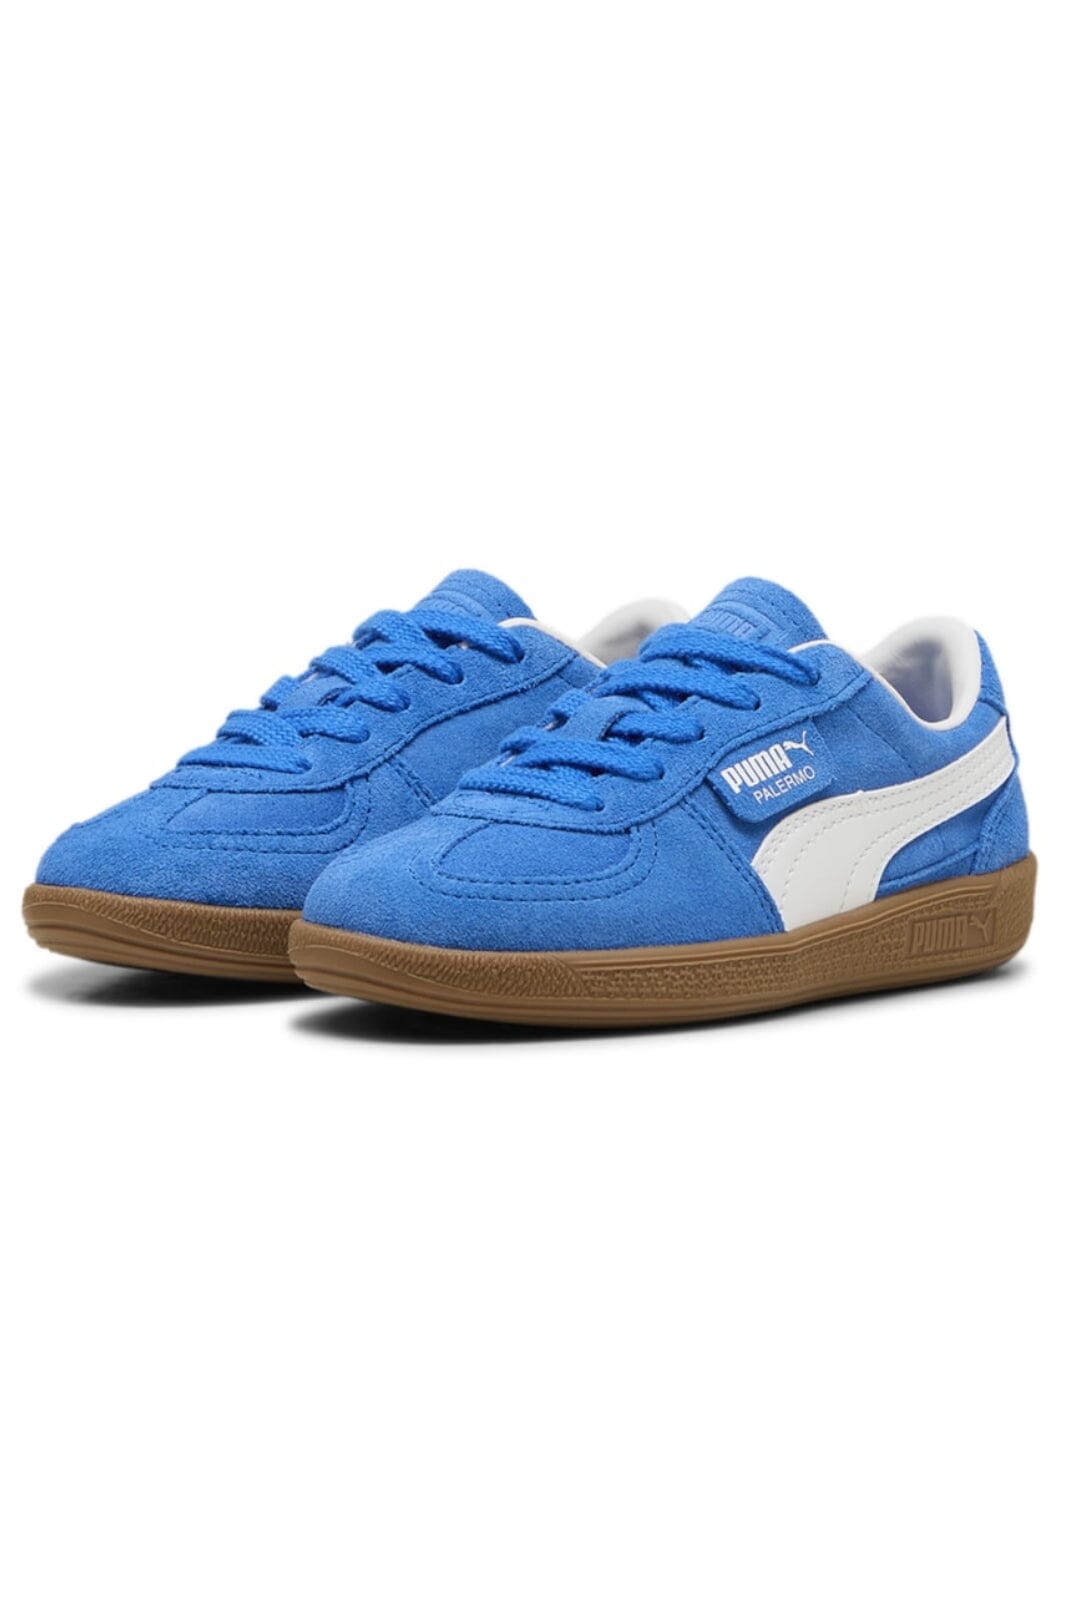 Puma - Palermo PS - Blue 11 Sneakers 